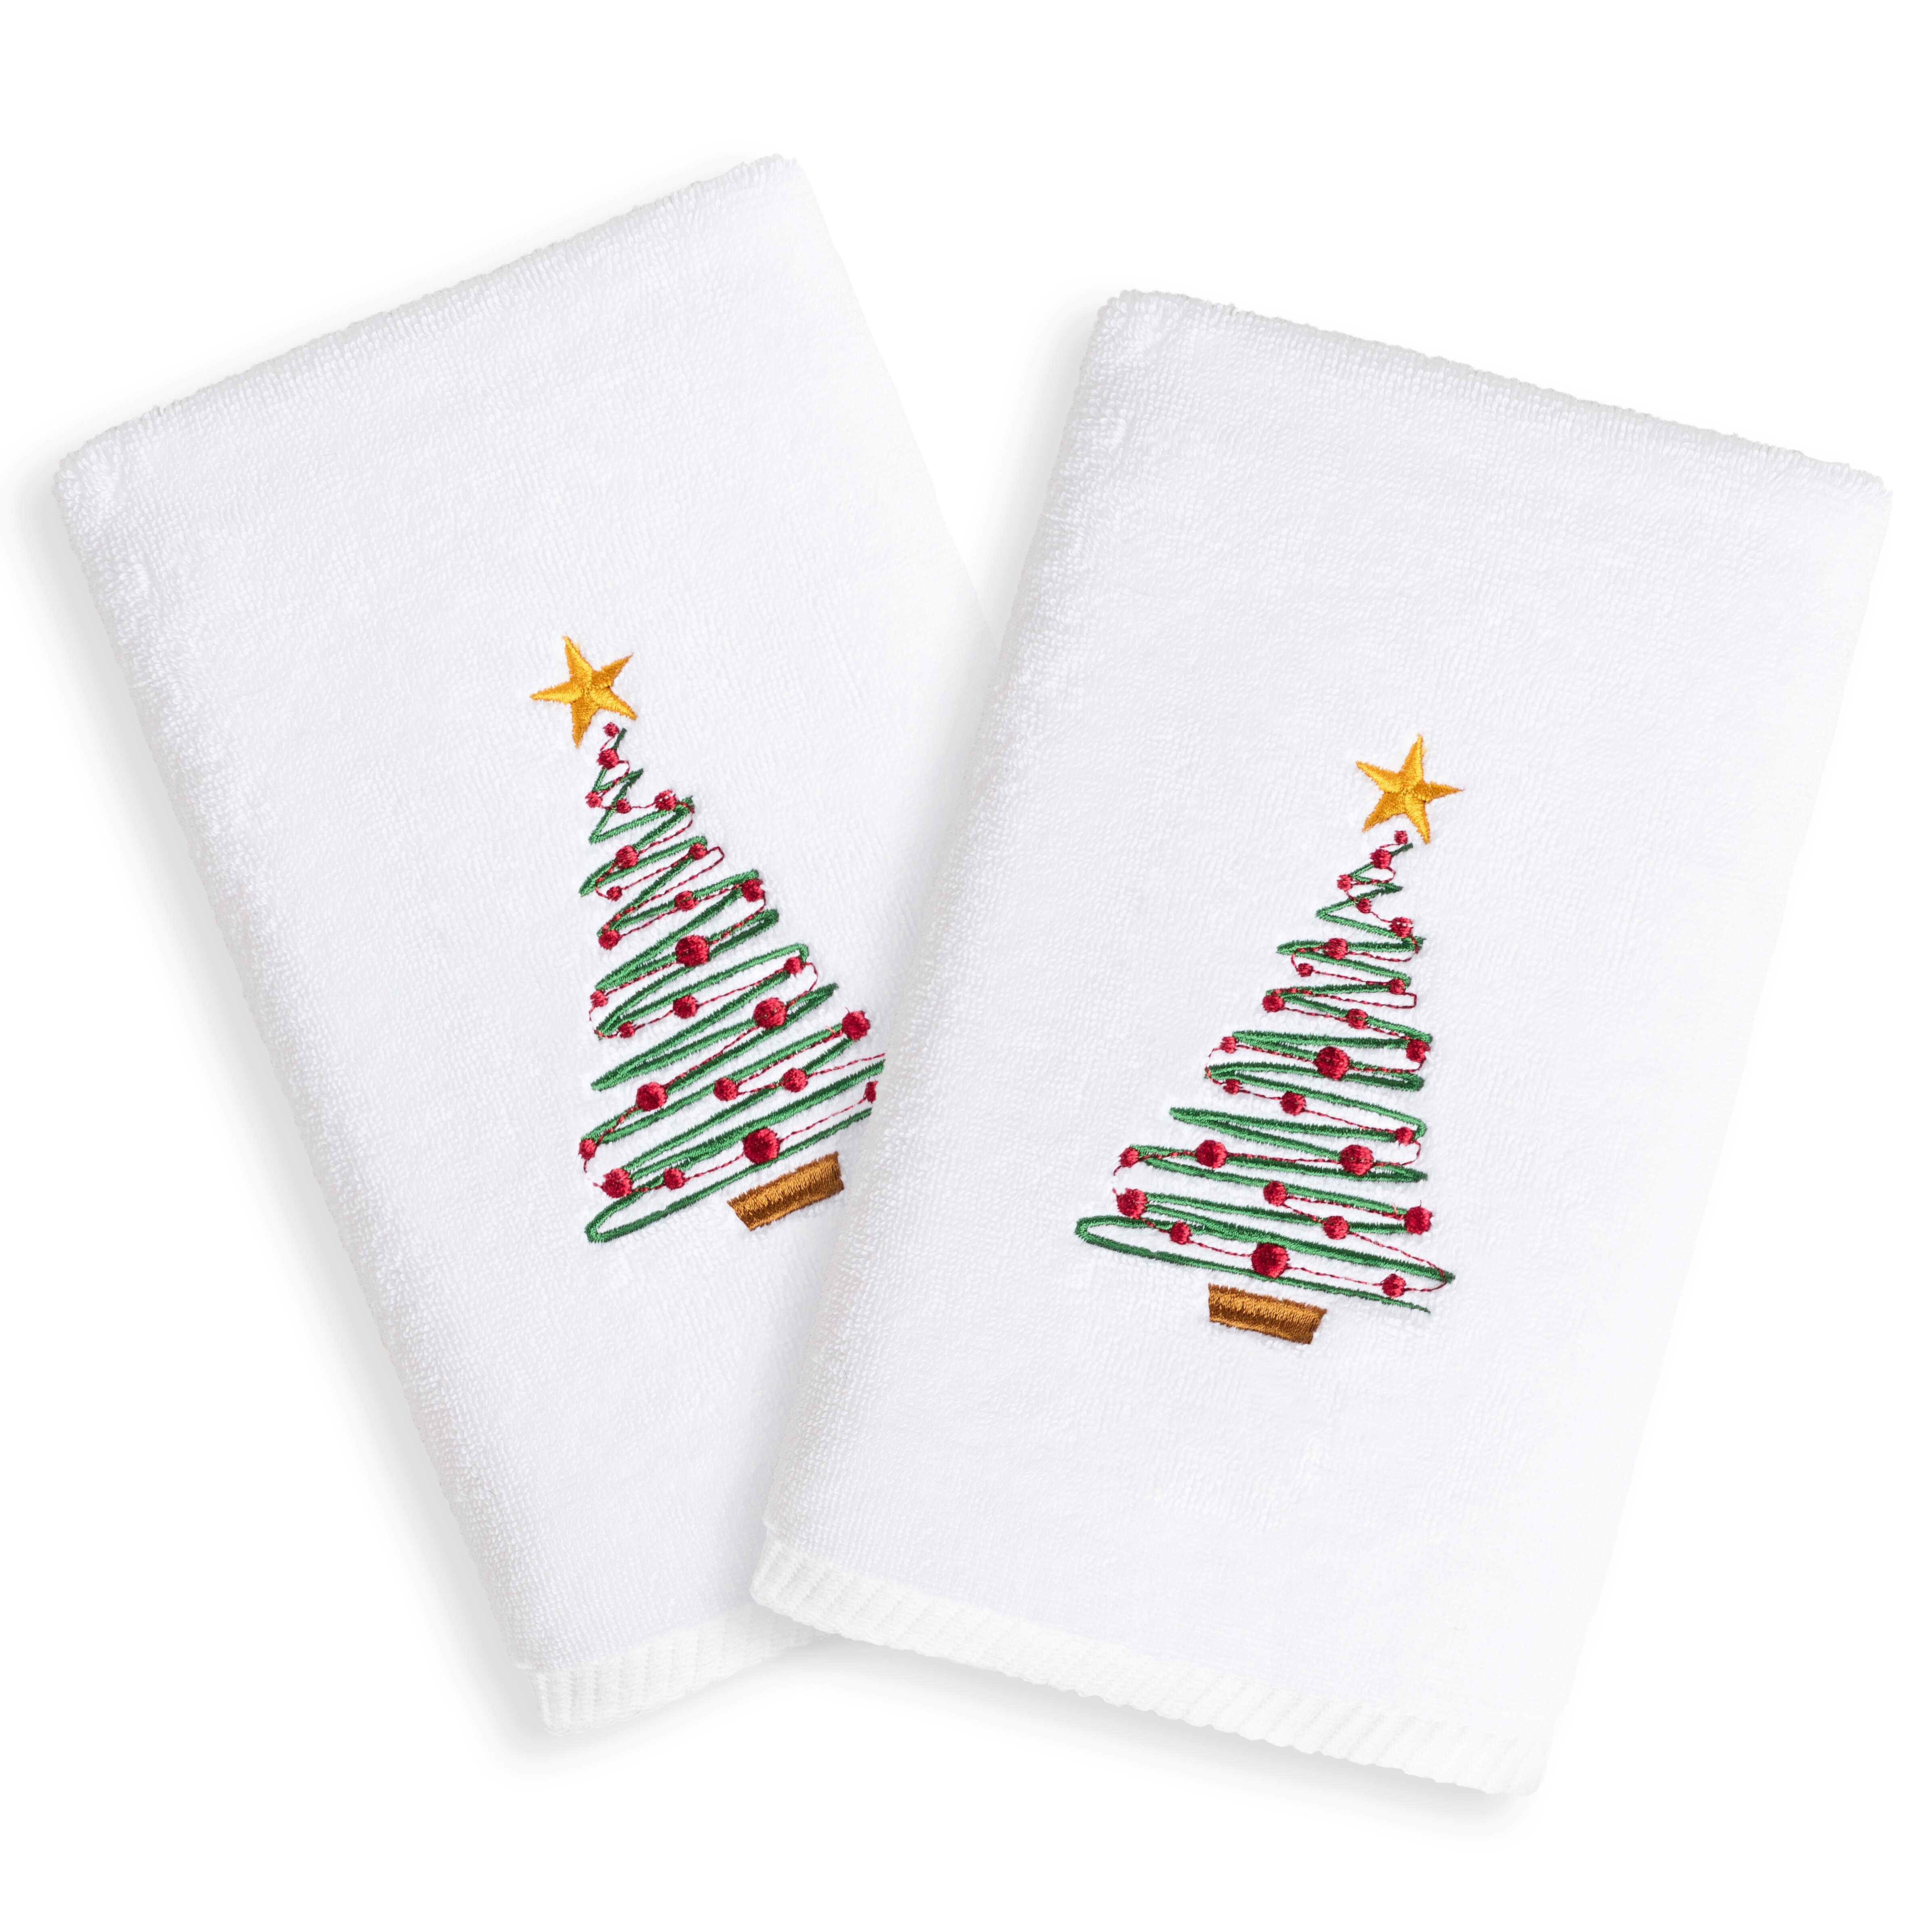 Gnome Christmas SET OF 2 Bathroom HAND TOWELS EMBROIDERED NEW BY LAURA 